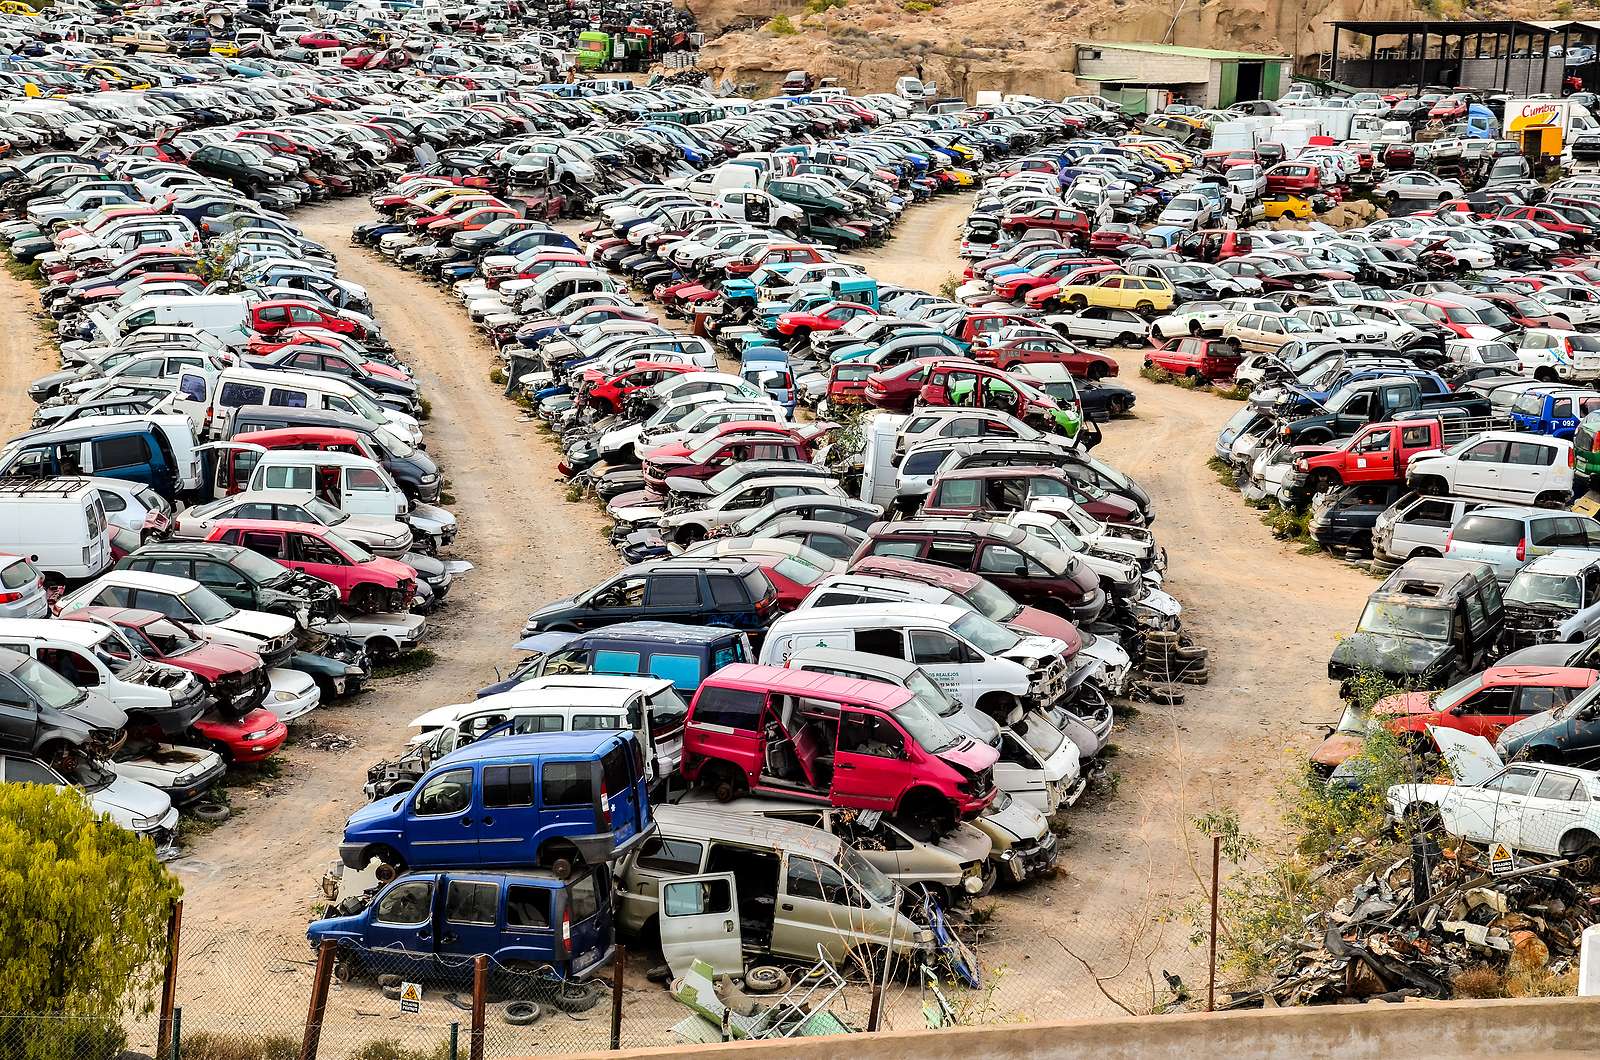 Salvage Yards That Buy Cars Near Me